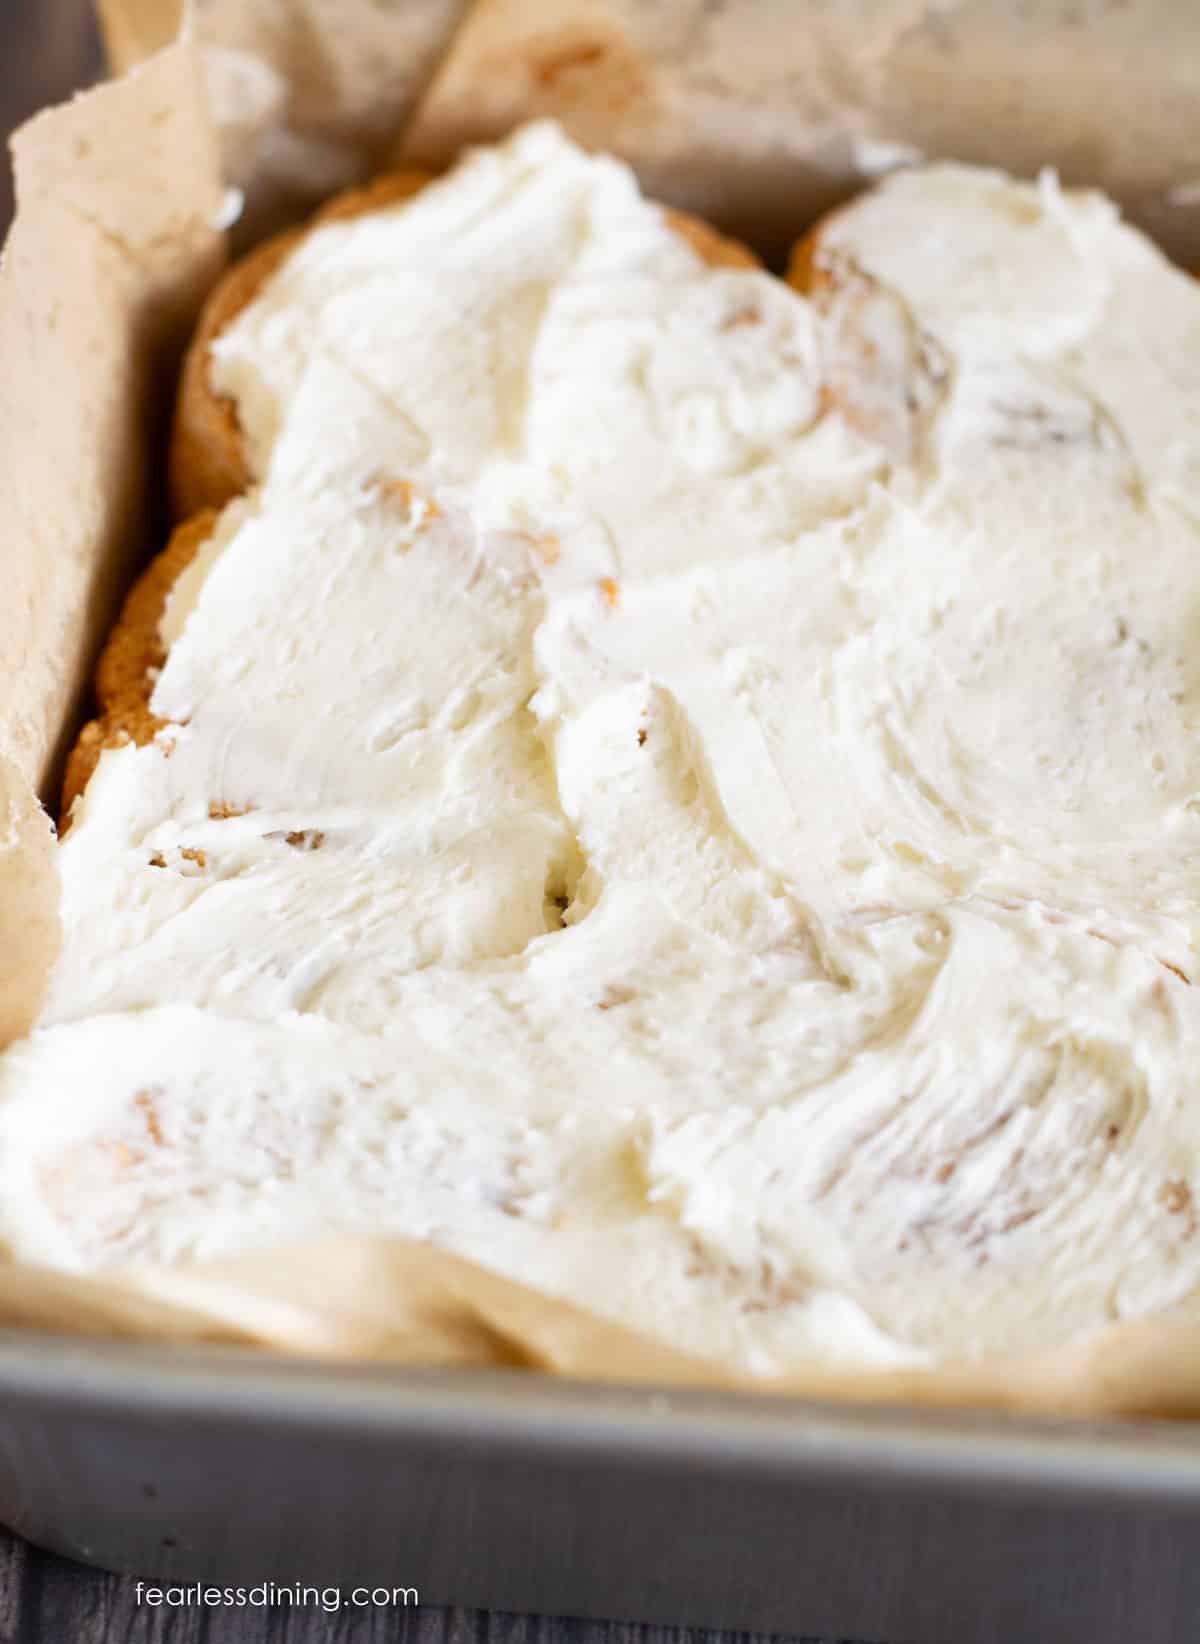 A pan full of frosted no-yeast cinnamon rolls.